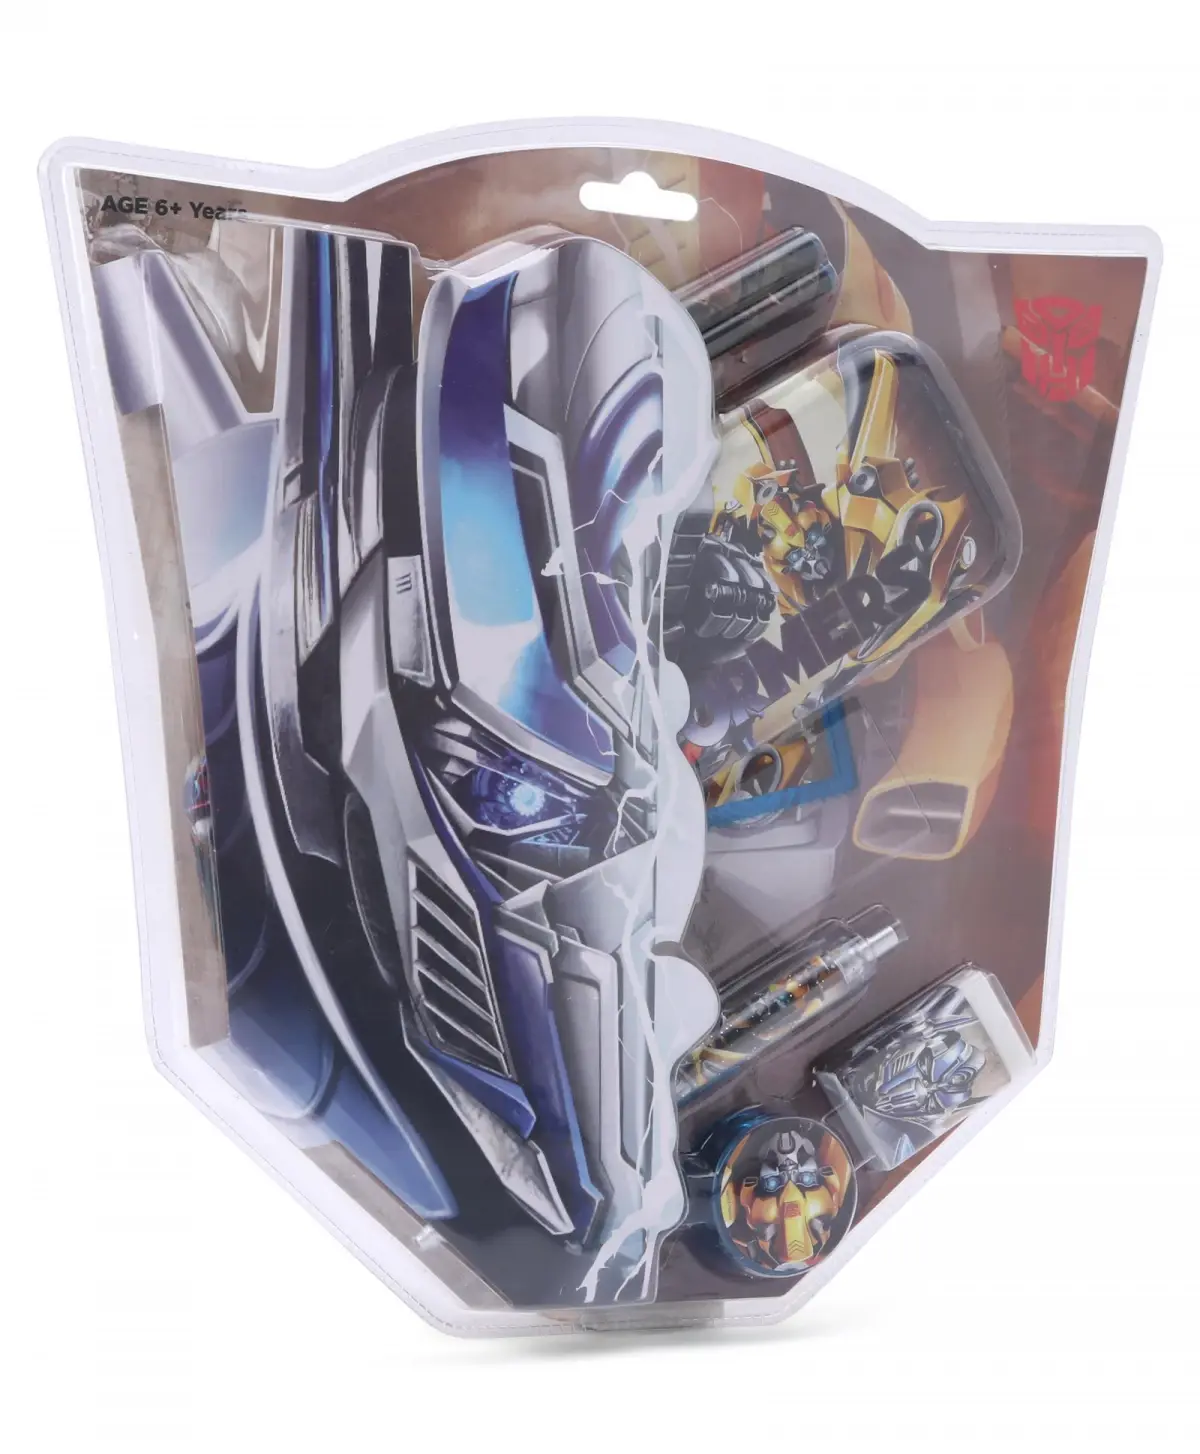 Striders Transformers Stationery Set (7Pcs) With Transformers Theme, 3Y+, Multicolour